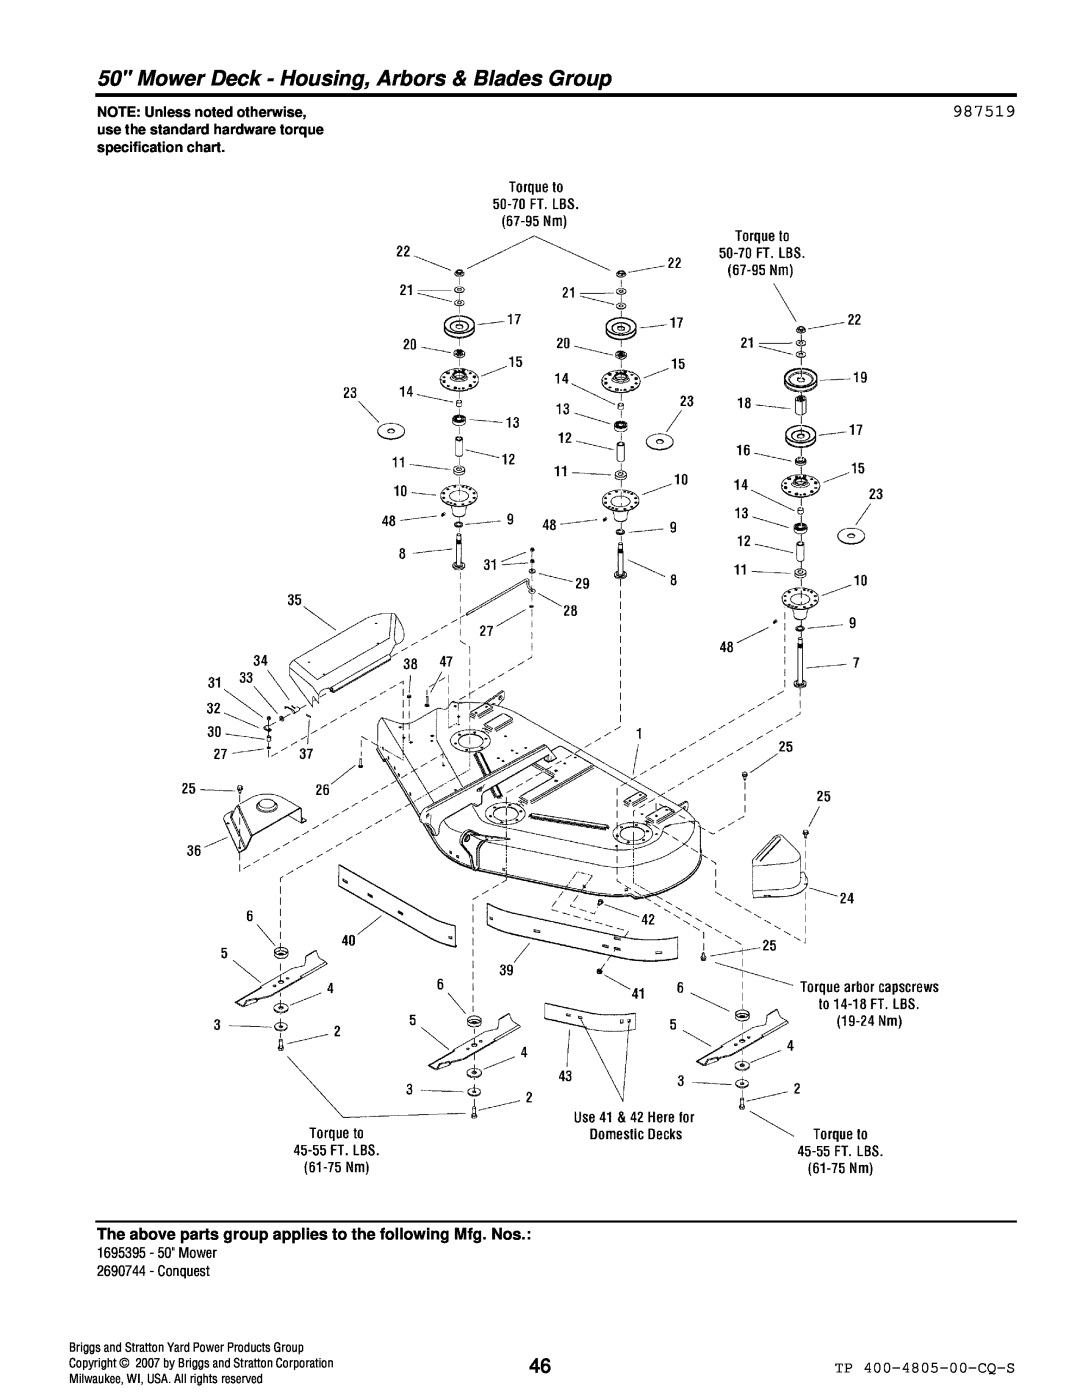 Simplicity 4WD Series manual Mower Deck - Housing, Arbors & Blades Group, 987519, NOTE Unless noted otherwise 